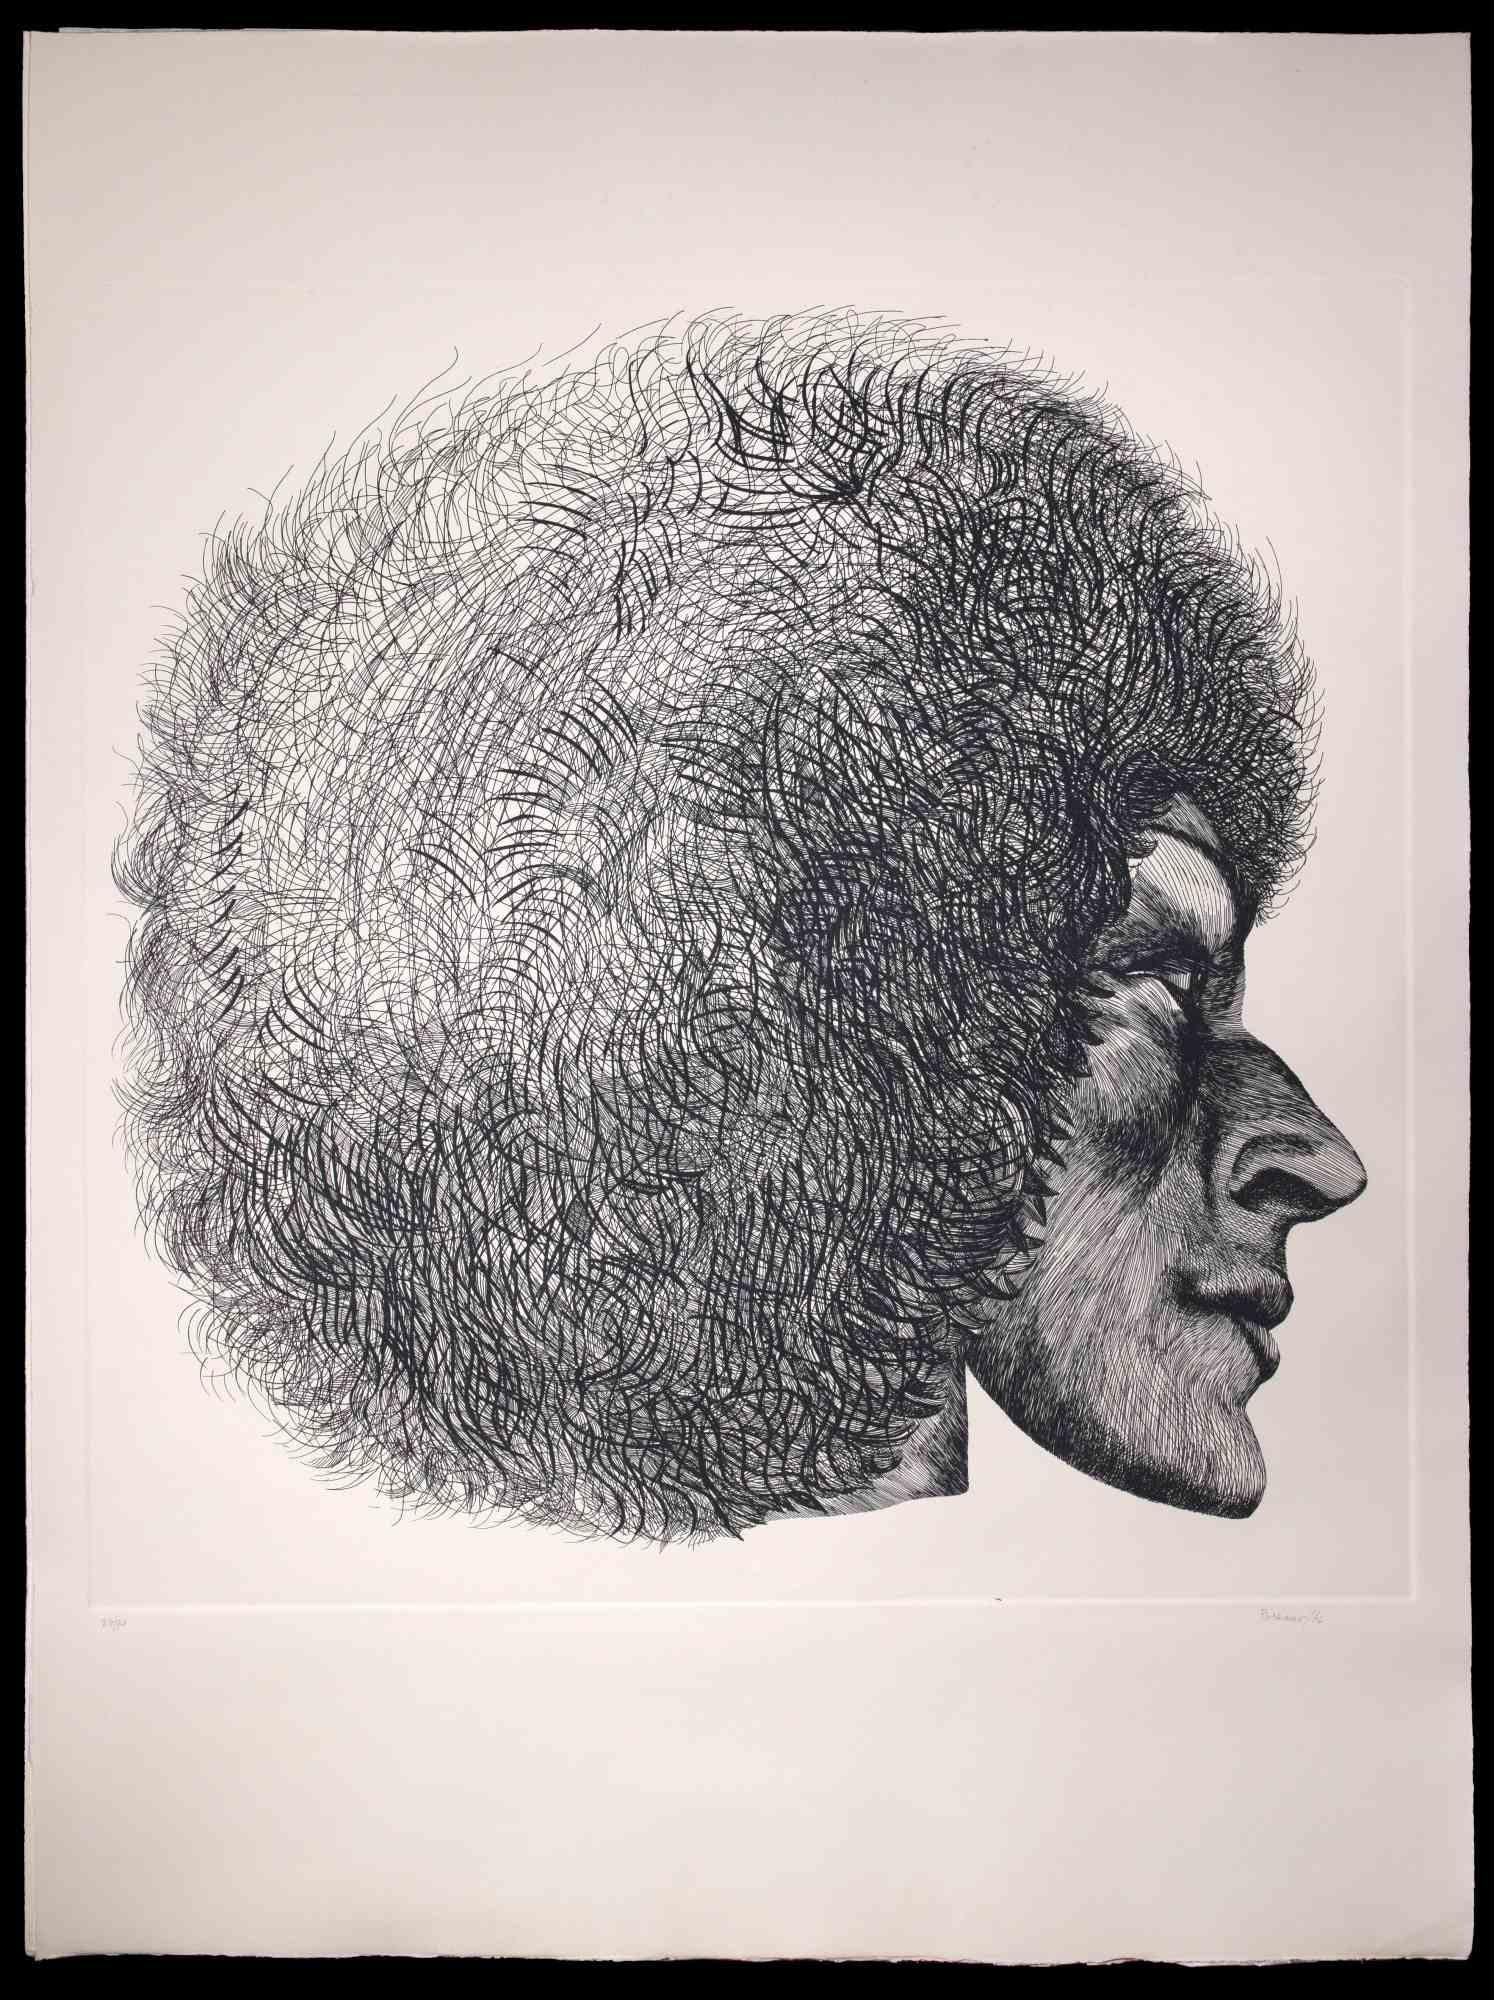 Profile is an original modern artowork realized by the Italian artist Giacomo Porzano (1925-2006) in 1972

Black and white etching.

Hand-signed and dated on the lower right.

Numbered on the lower left. Edition of 24/50.

Giacomo Porzano was born